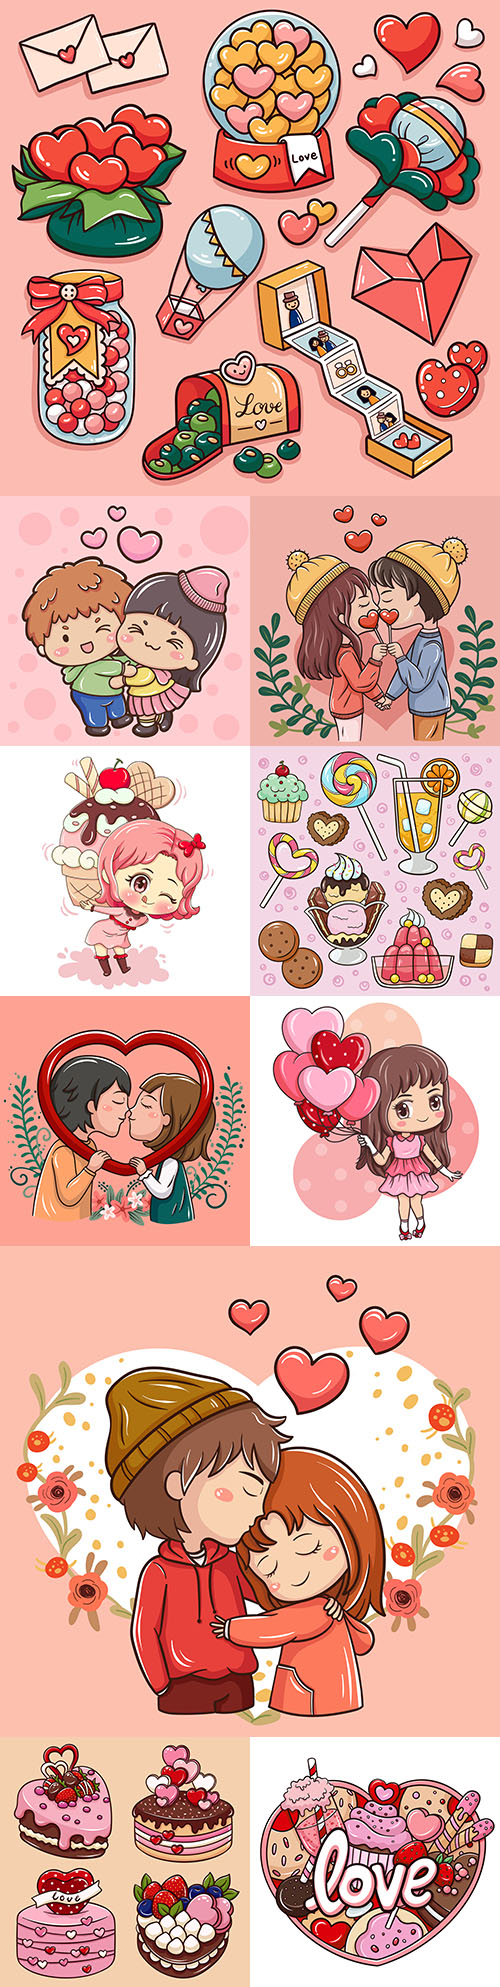 Valentine's Day illustration cartoon elements and gifts